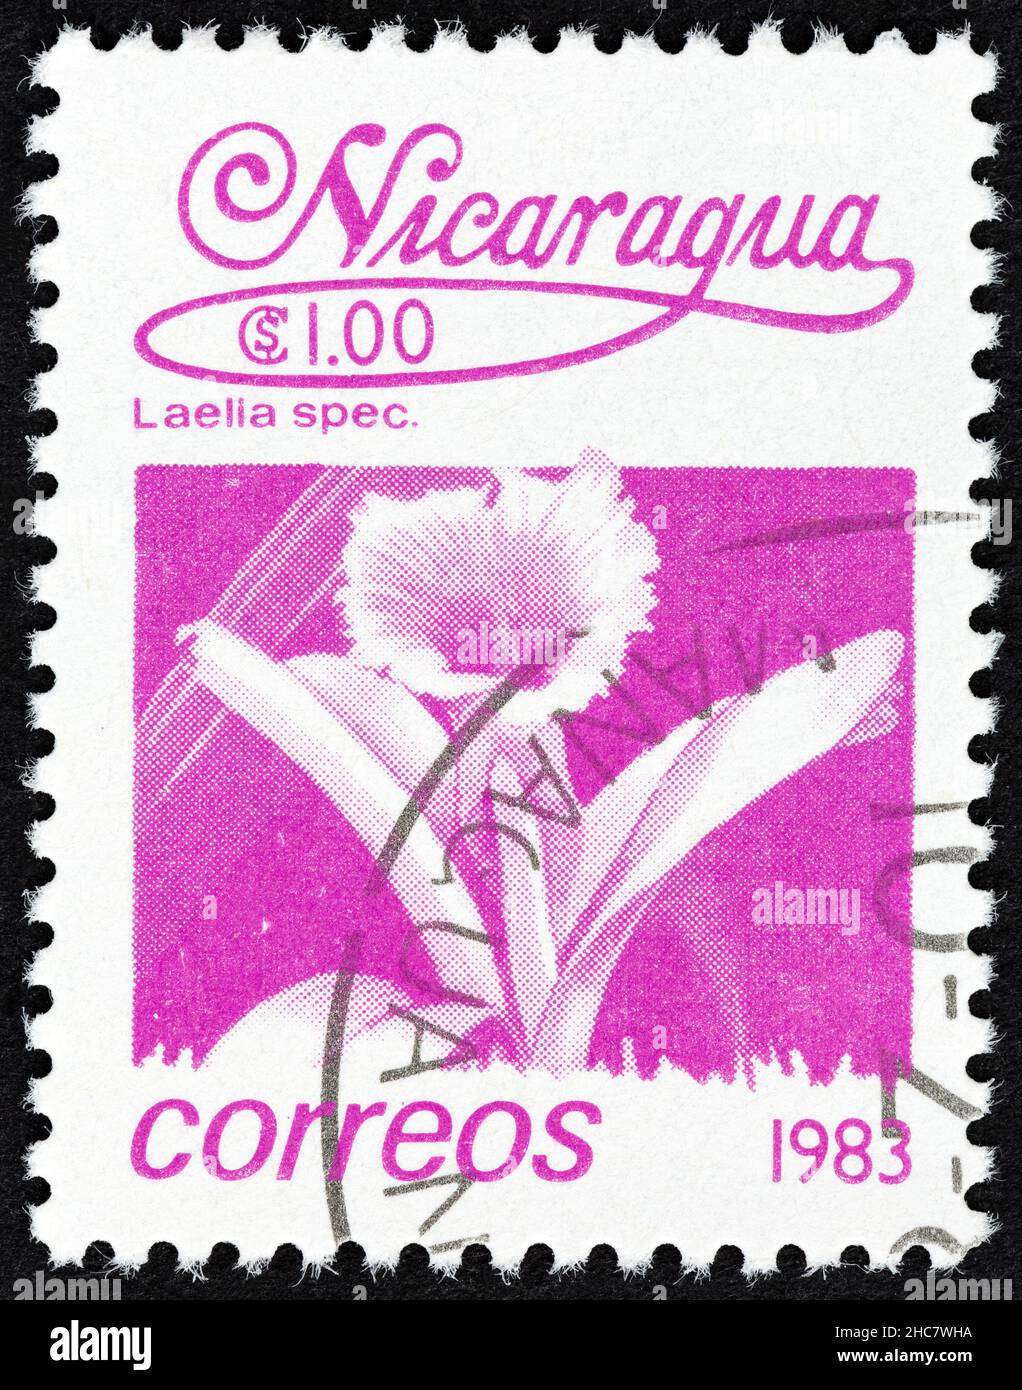 NICARAGUA - CIRCA 1983: A stamp printed in Nicaragua from the 'Flowers' issue shows Laelia spec., circa 1983. Stock Photo